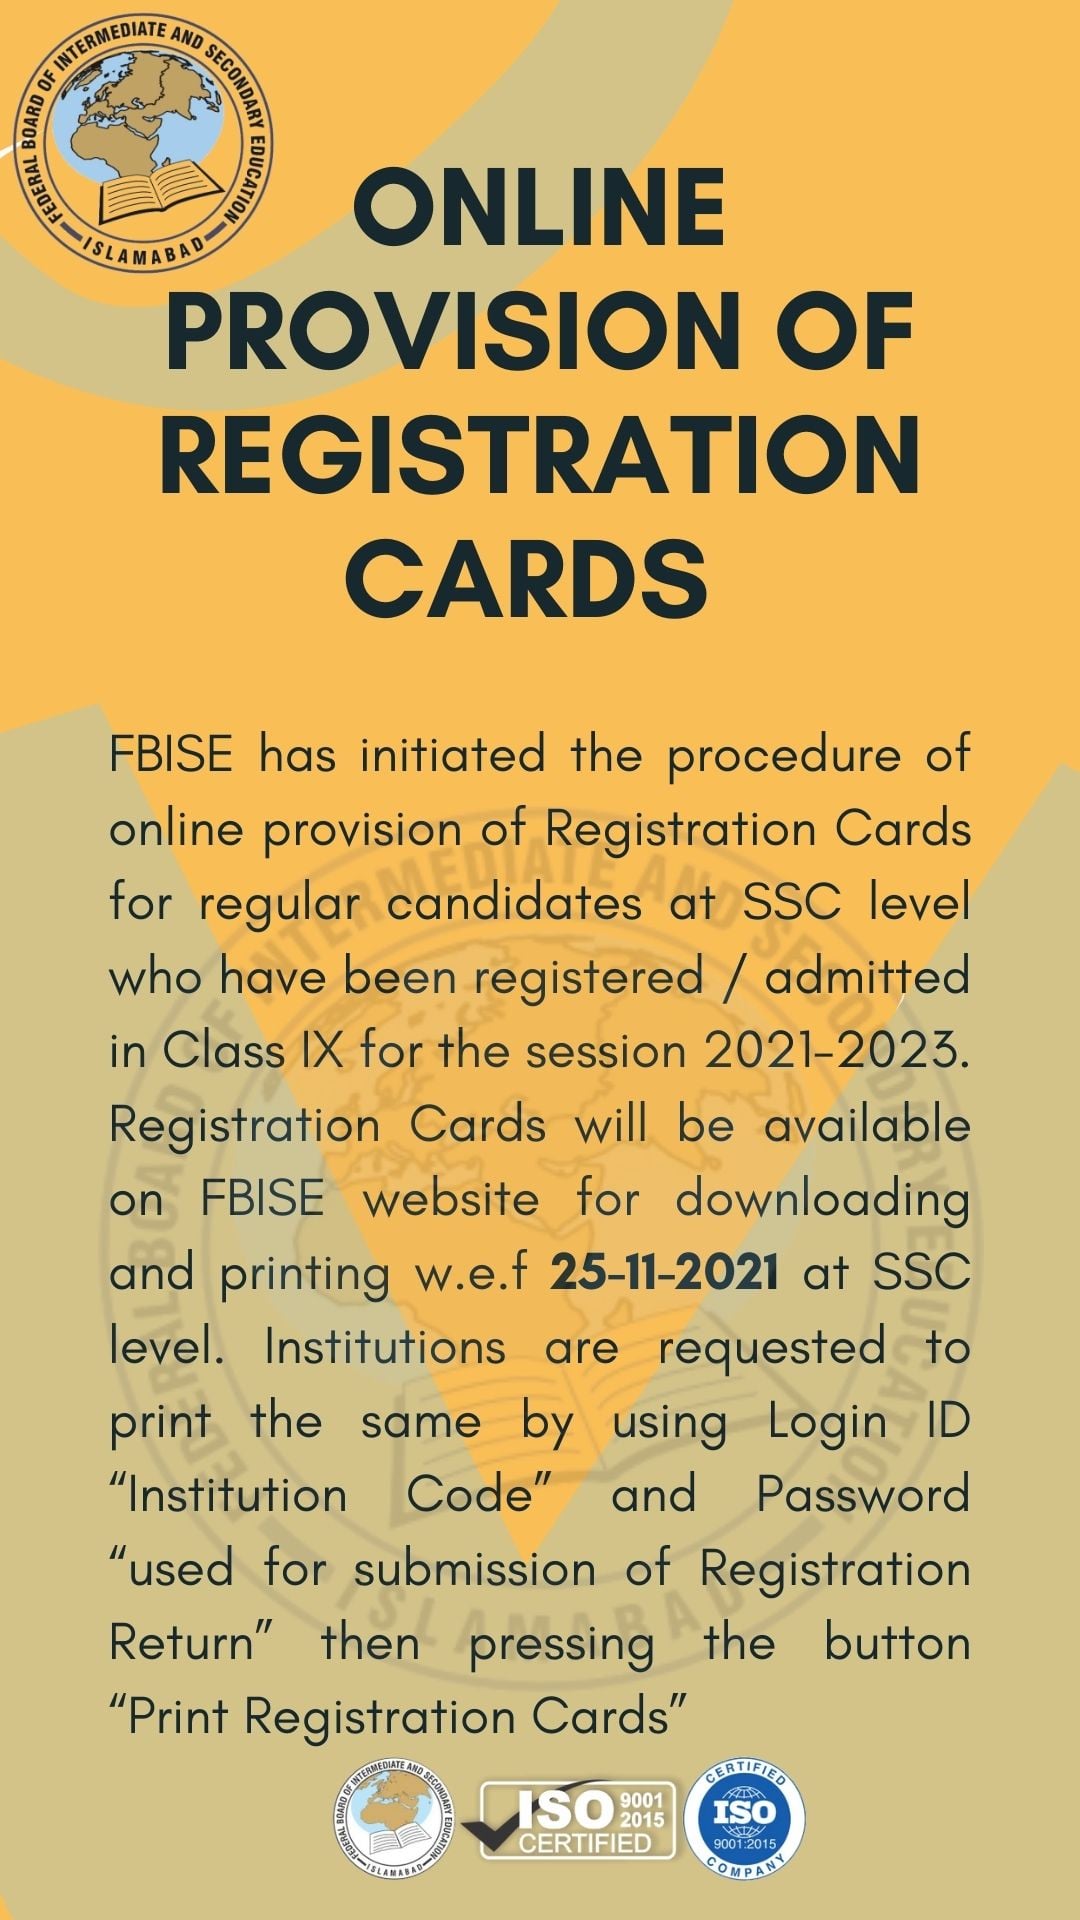 Procedure of online provision of Registration Cards FBISE Islamabad